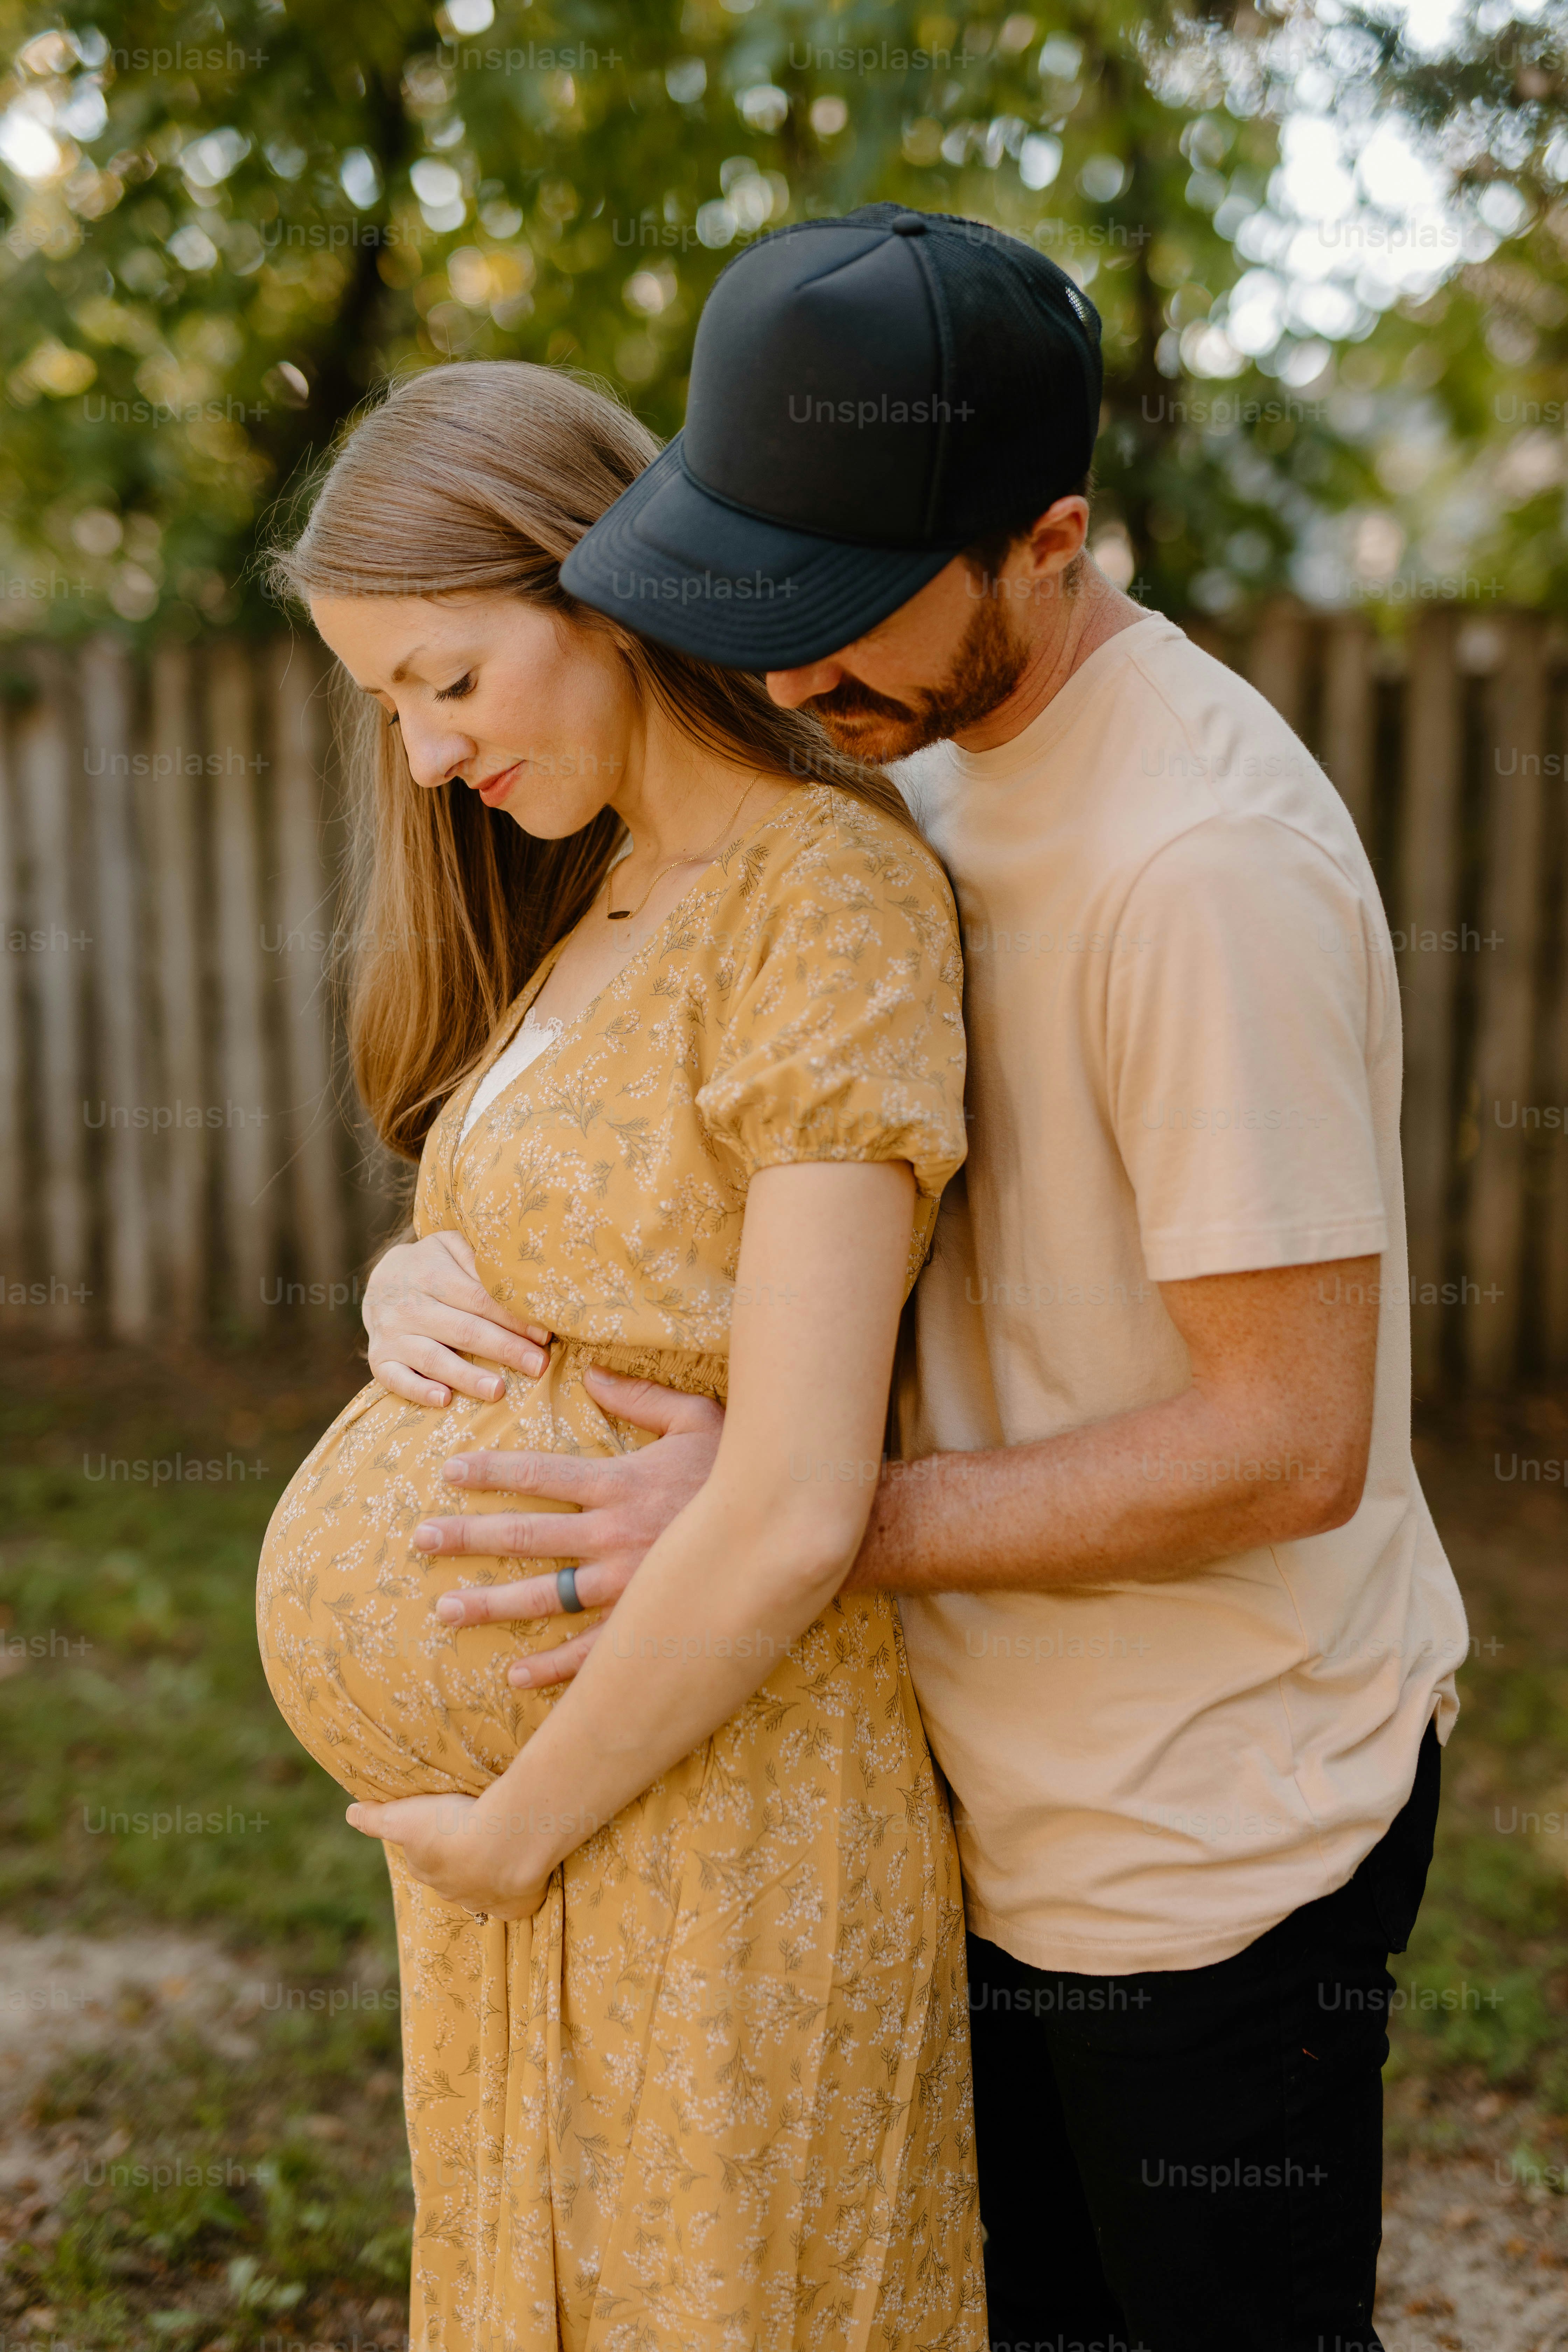 500+ Pregnant Woman Pictures Download Free Images on Unsplash photo image